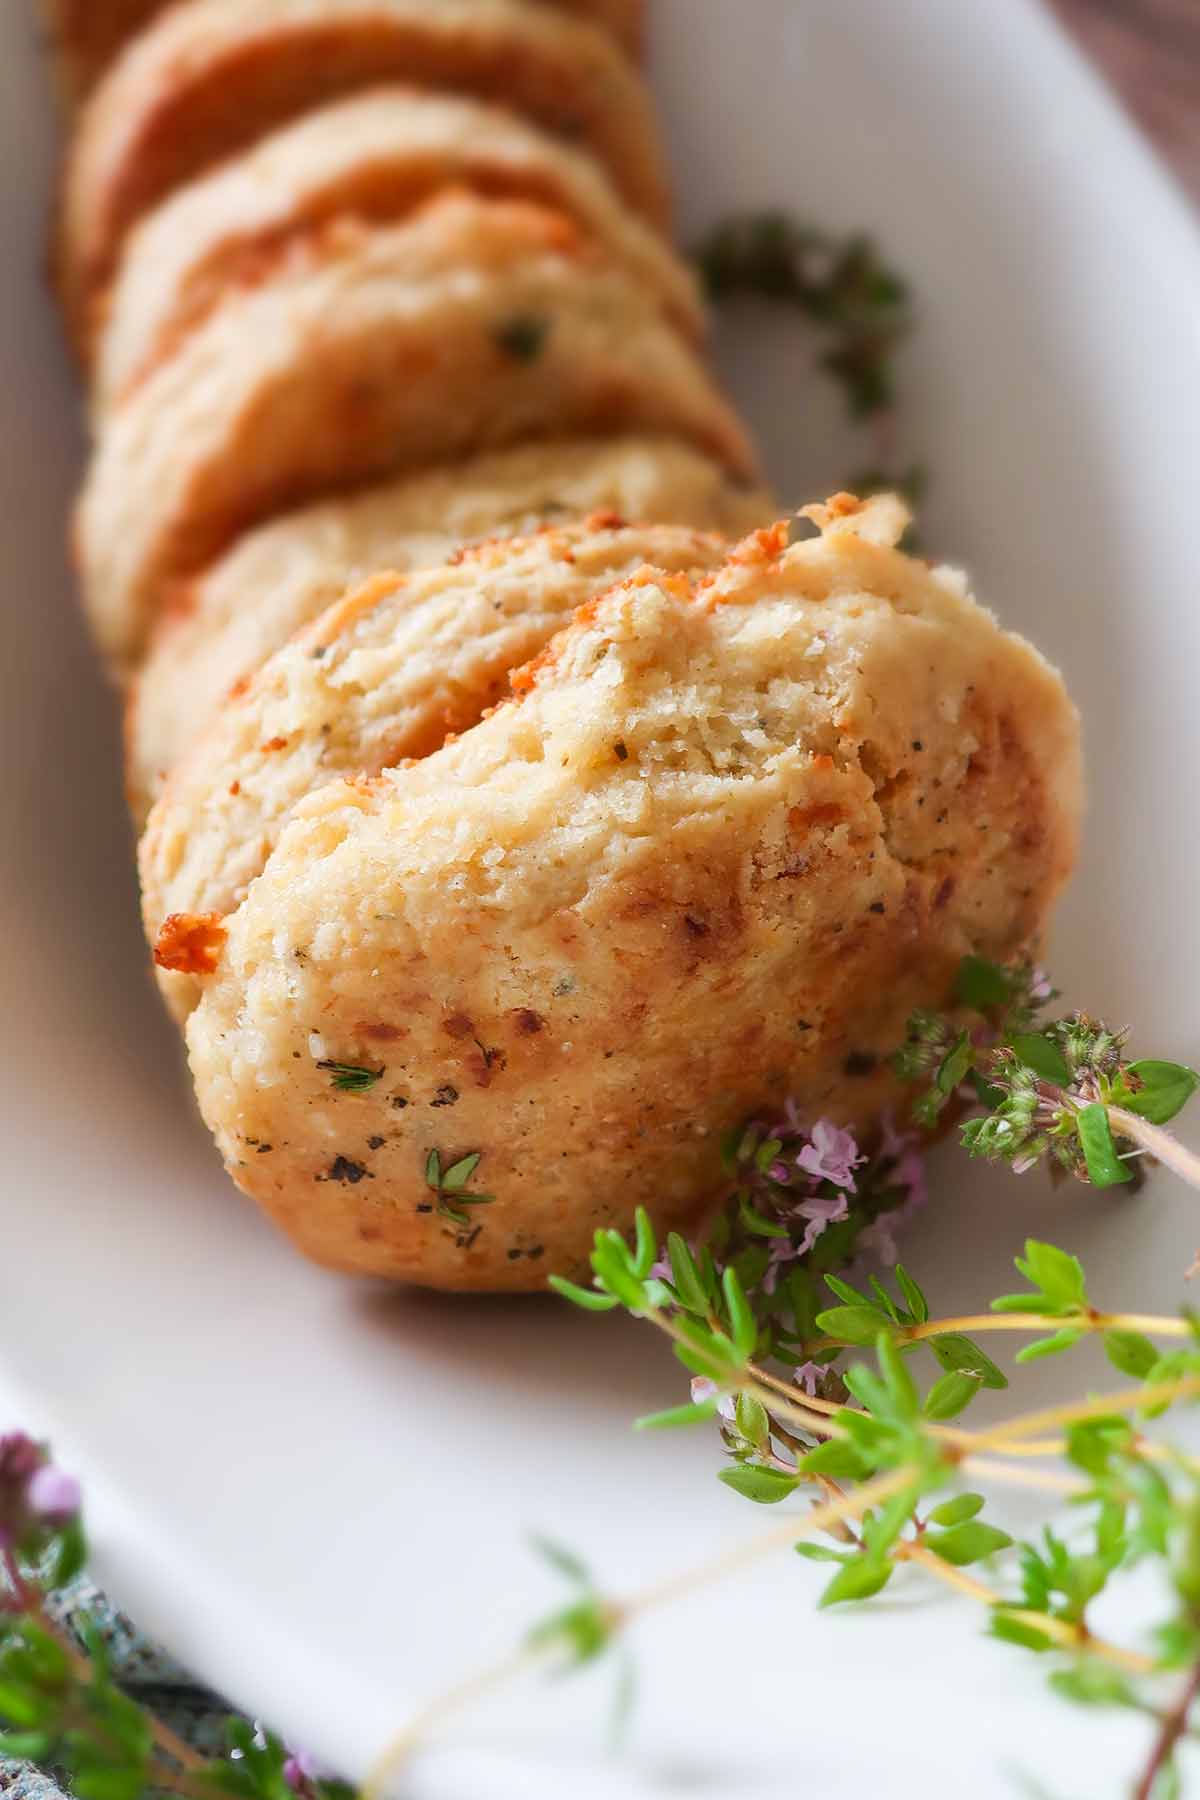 biscuits in a bowl garnished with fresh thyme